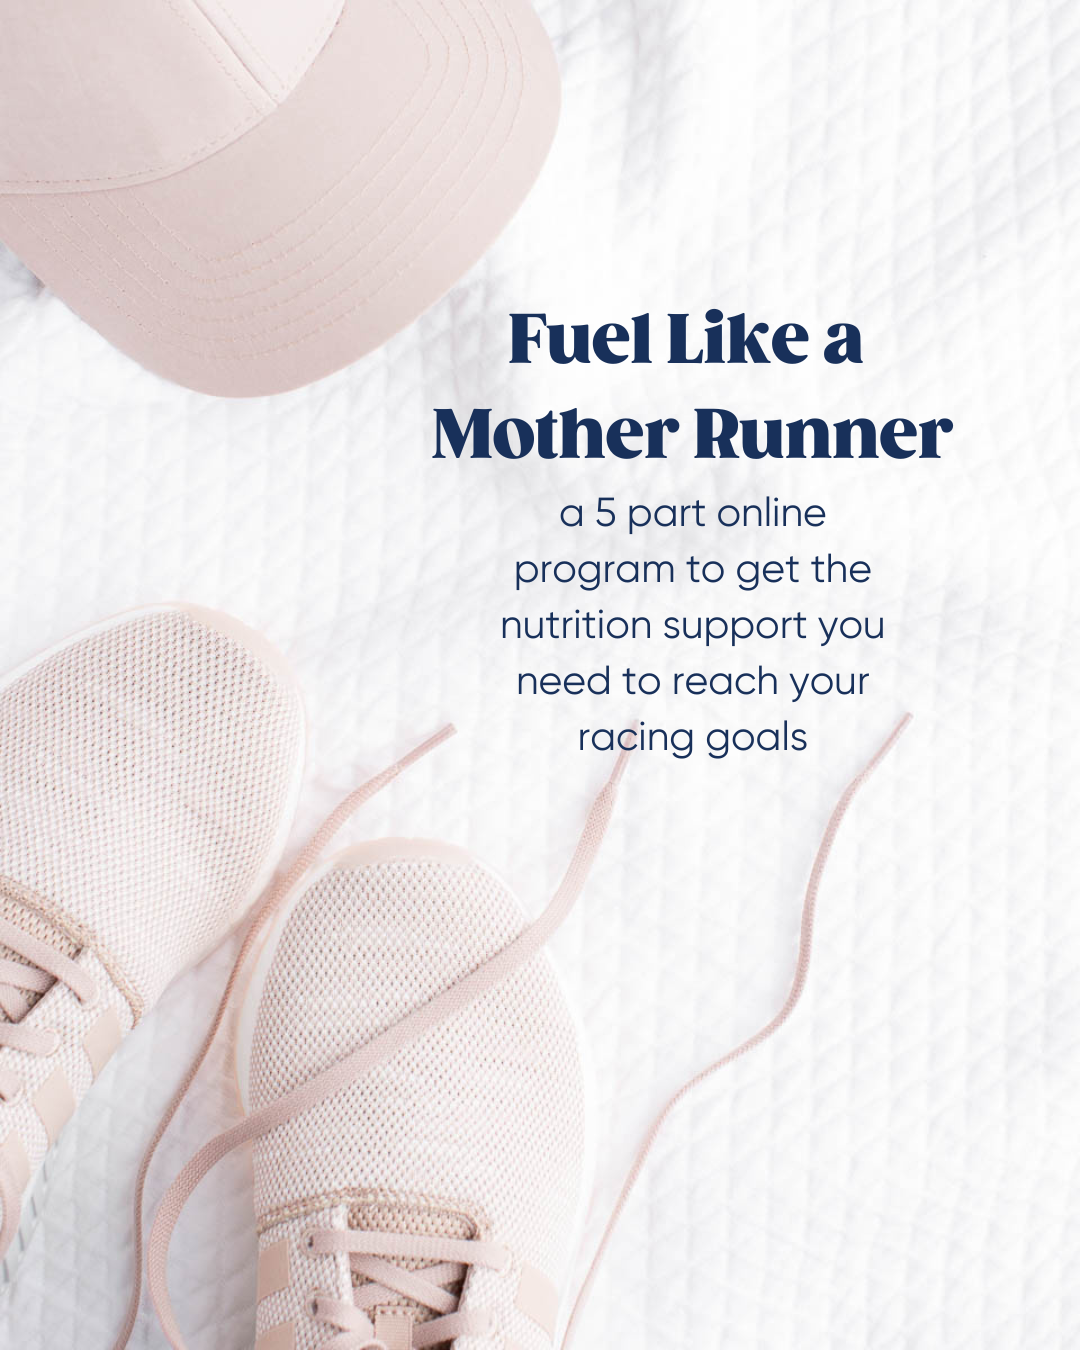 Fuel Like a Mother Runner